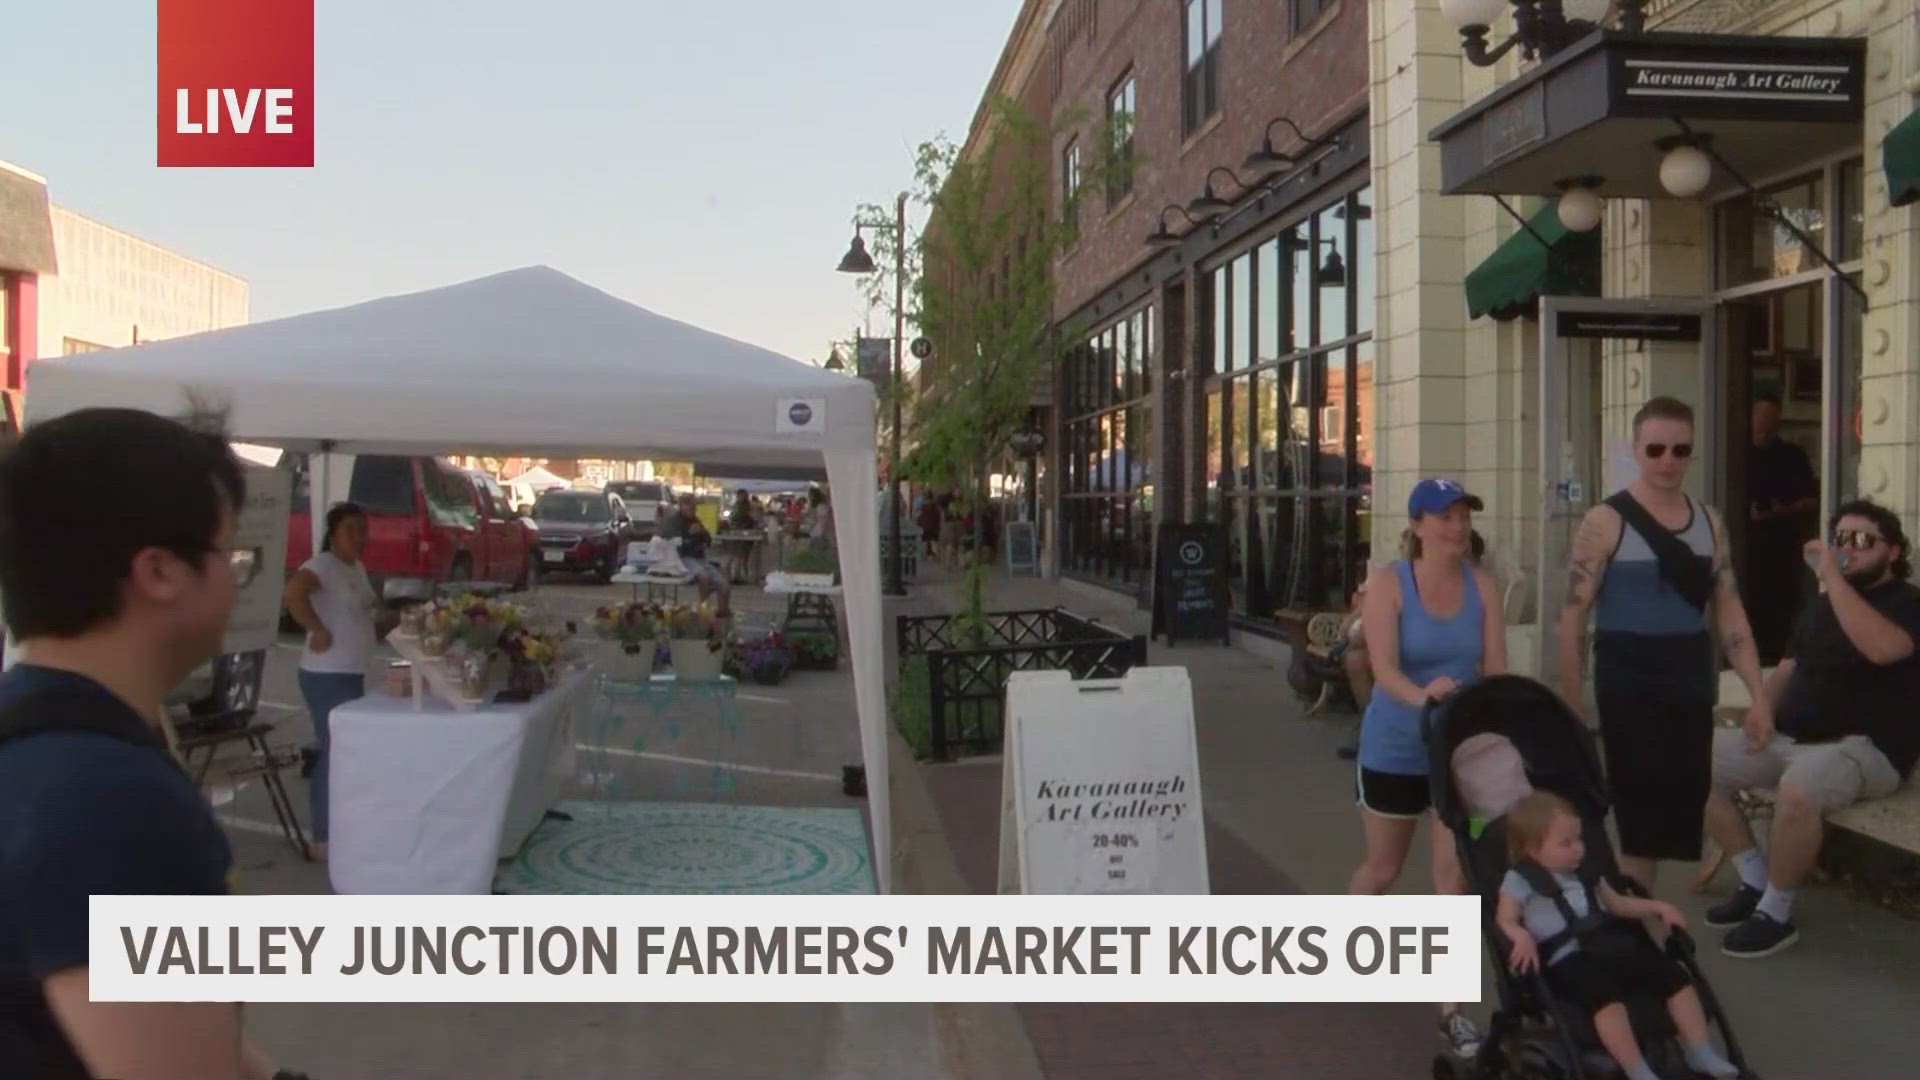 Valley Junction Farmers' Market Date, time, location, parking